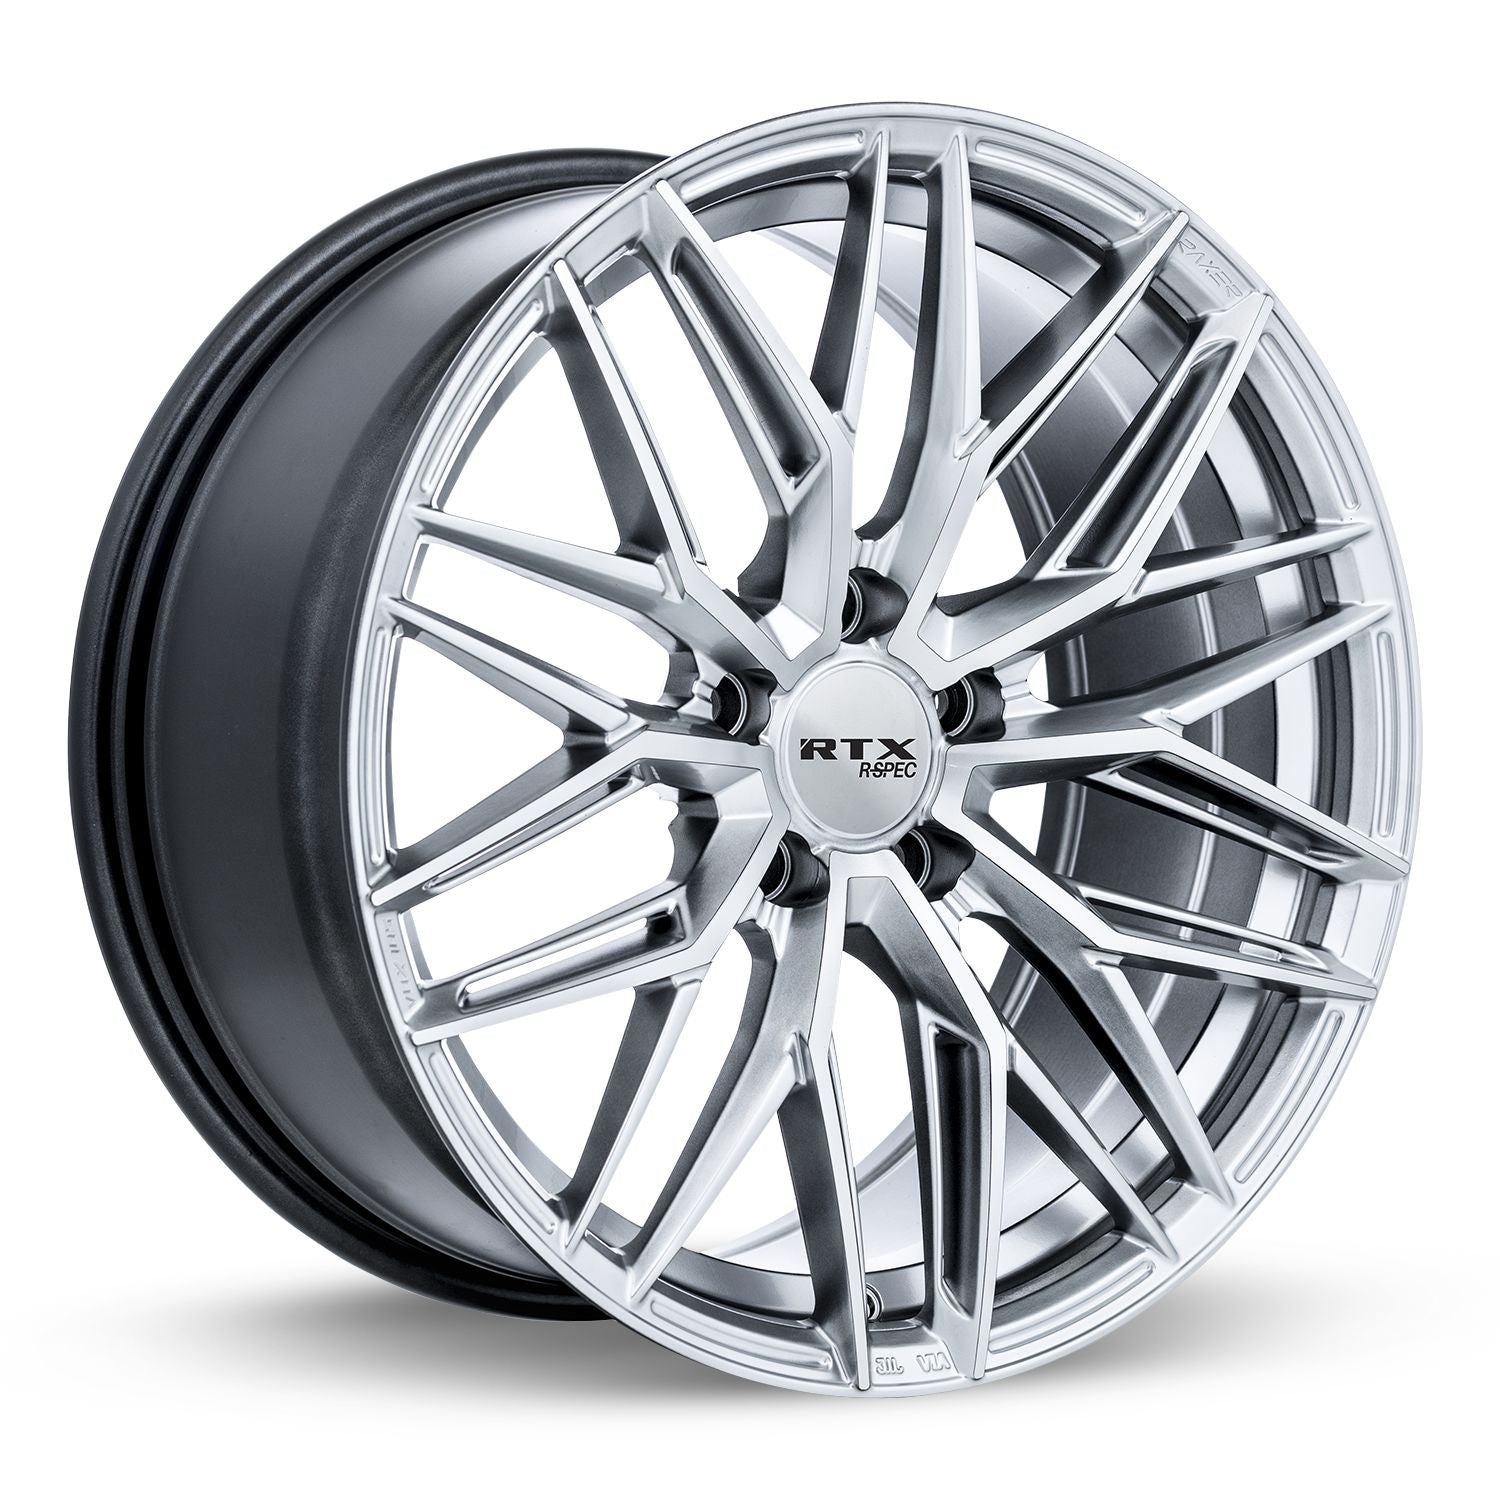 SW20 • Silver with Machined Face • 18x8.5 5x112 ET45 CB66.6